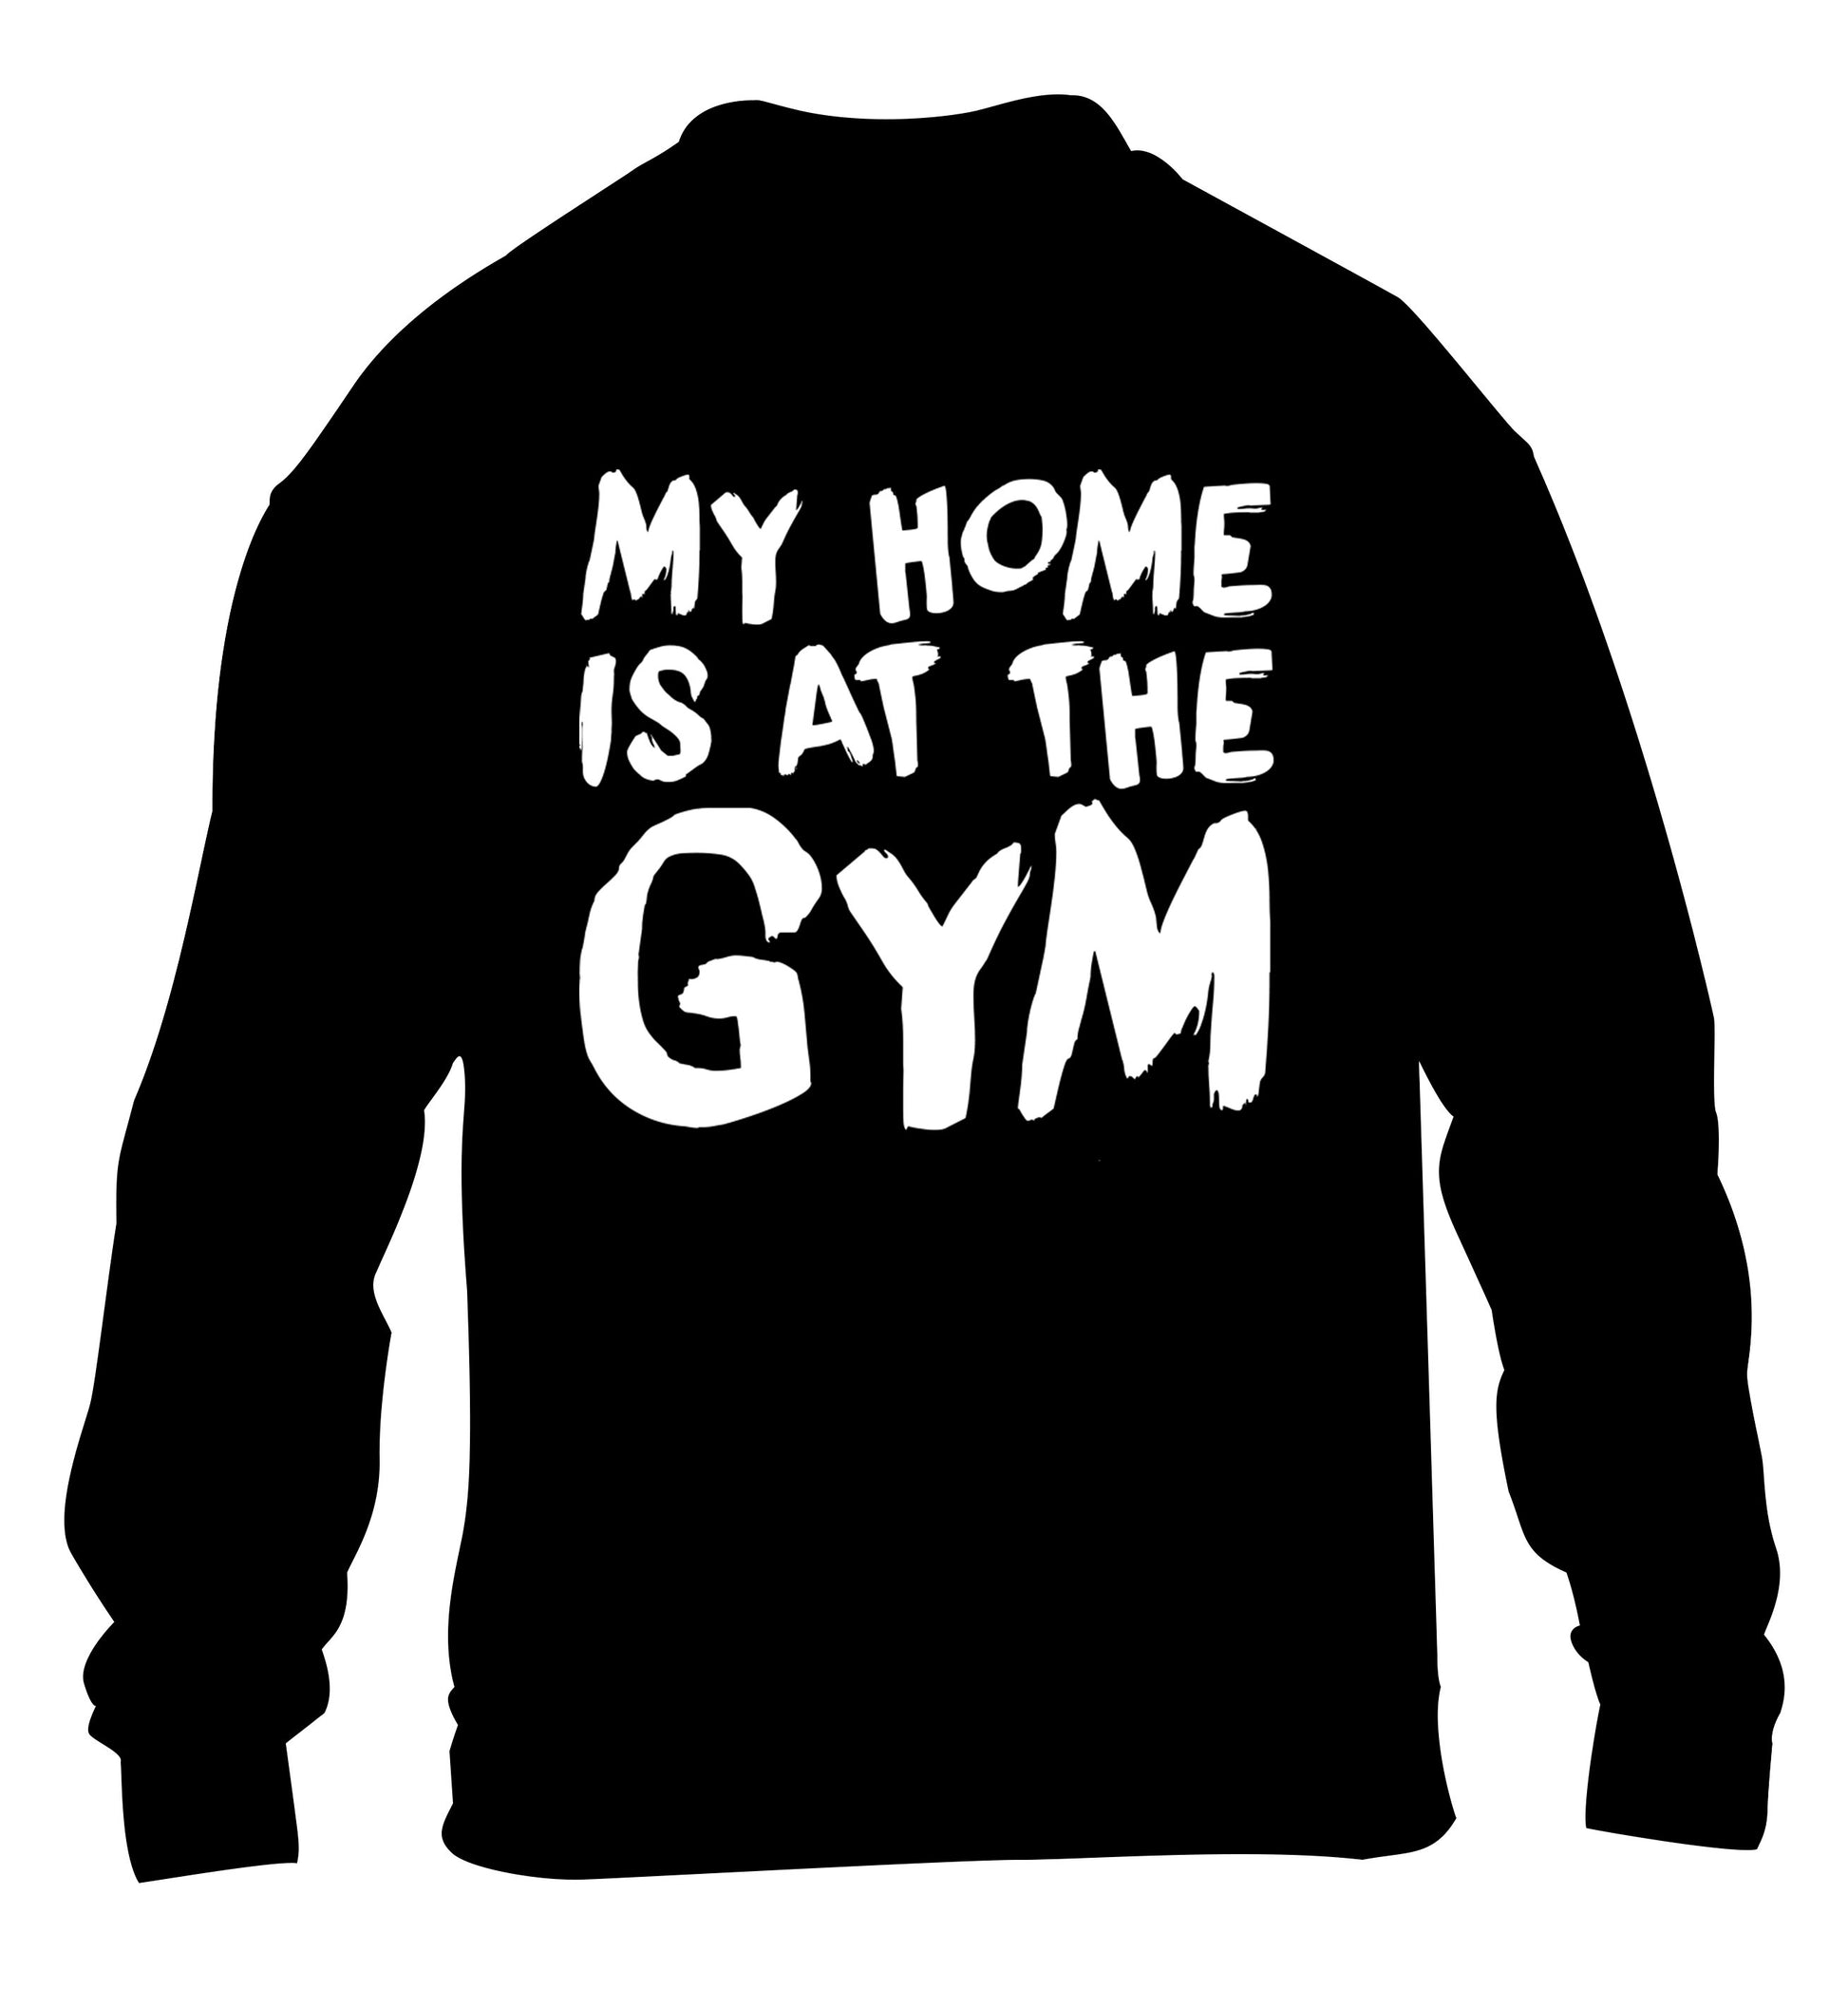 My home is at the gym children's black sweater 12-14 Years